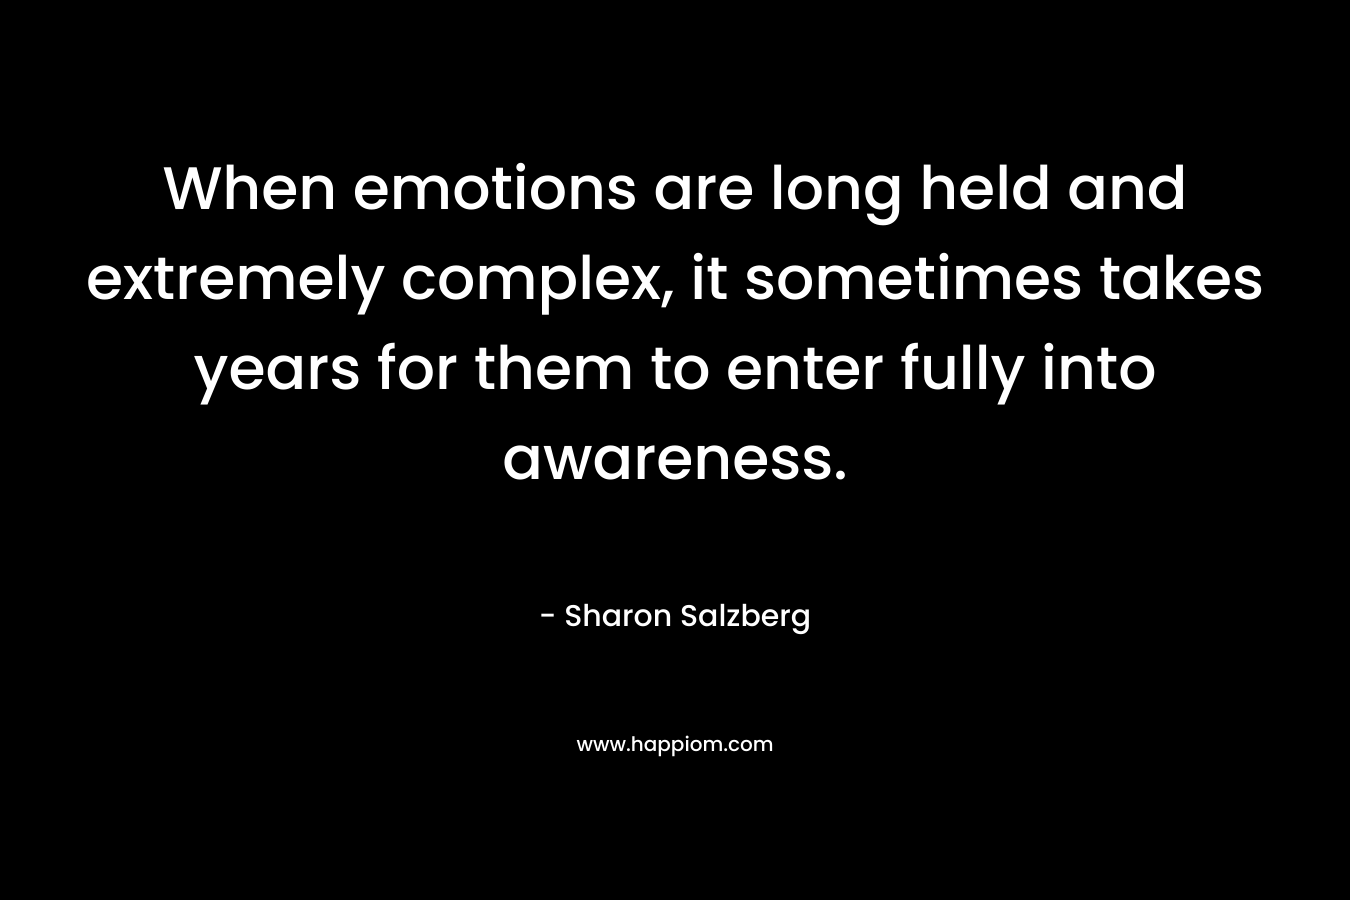 When emotions are long held and extremely complex, it sometimes takes years for them to enter fully into awareness.